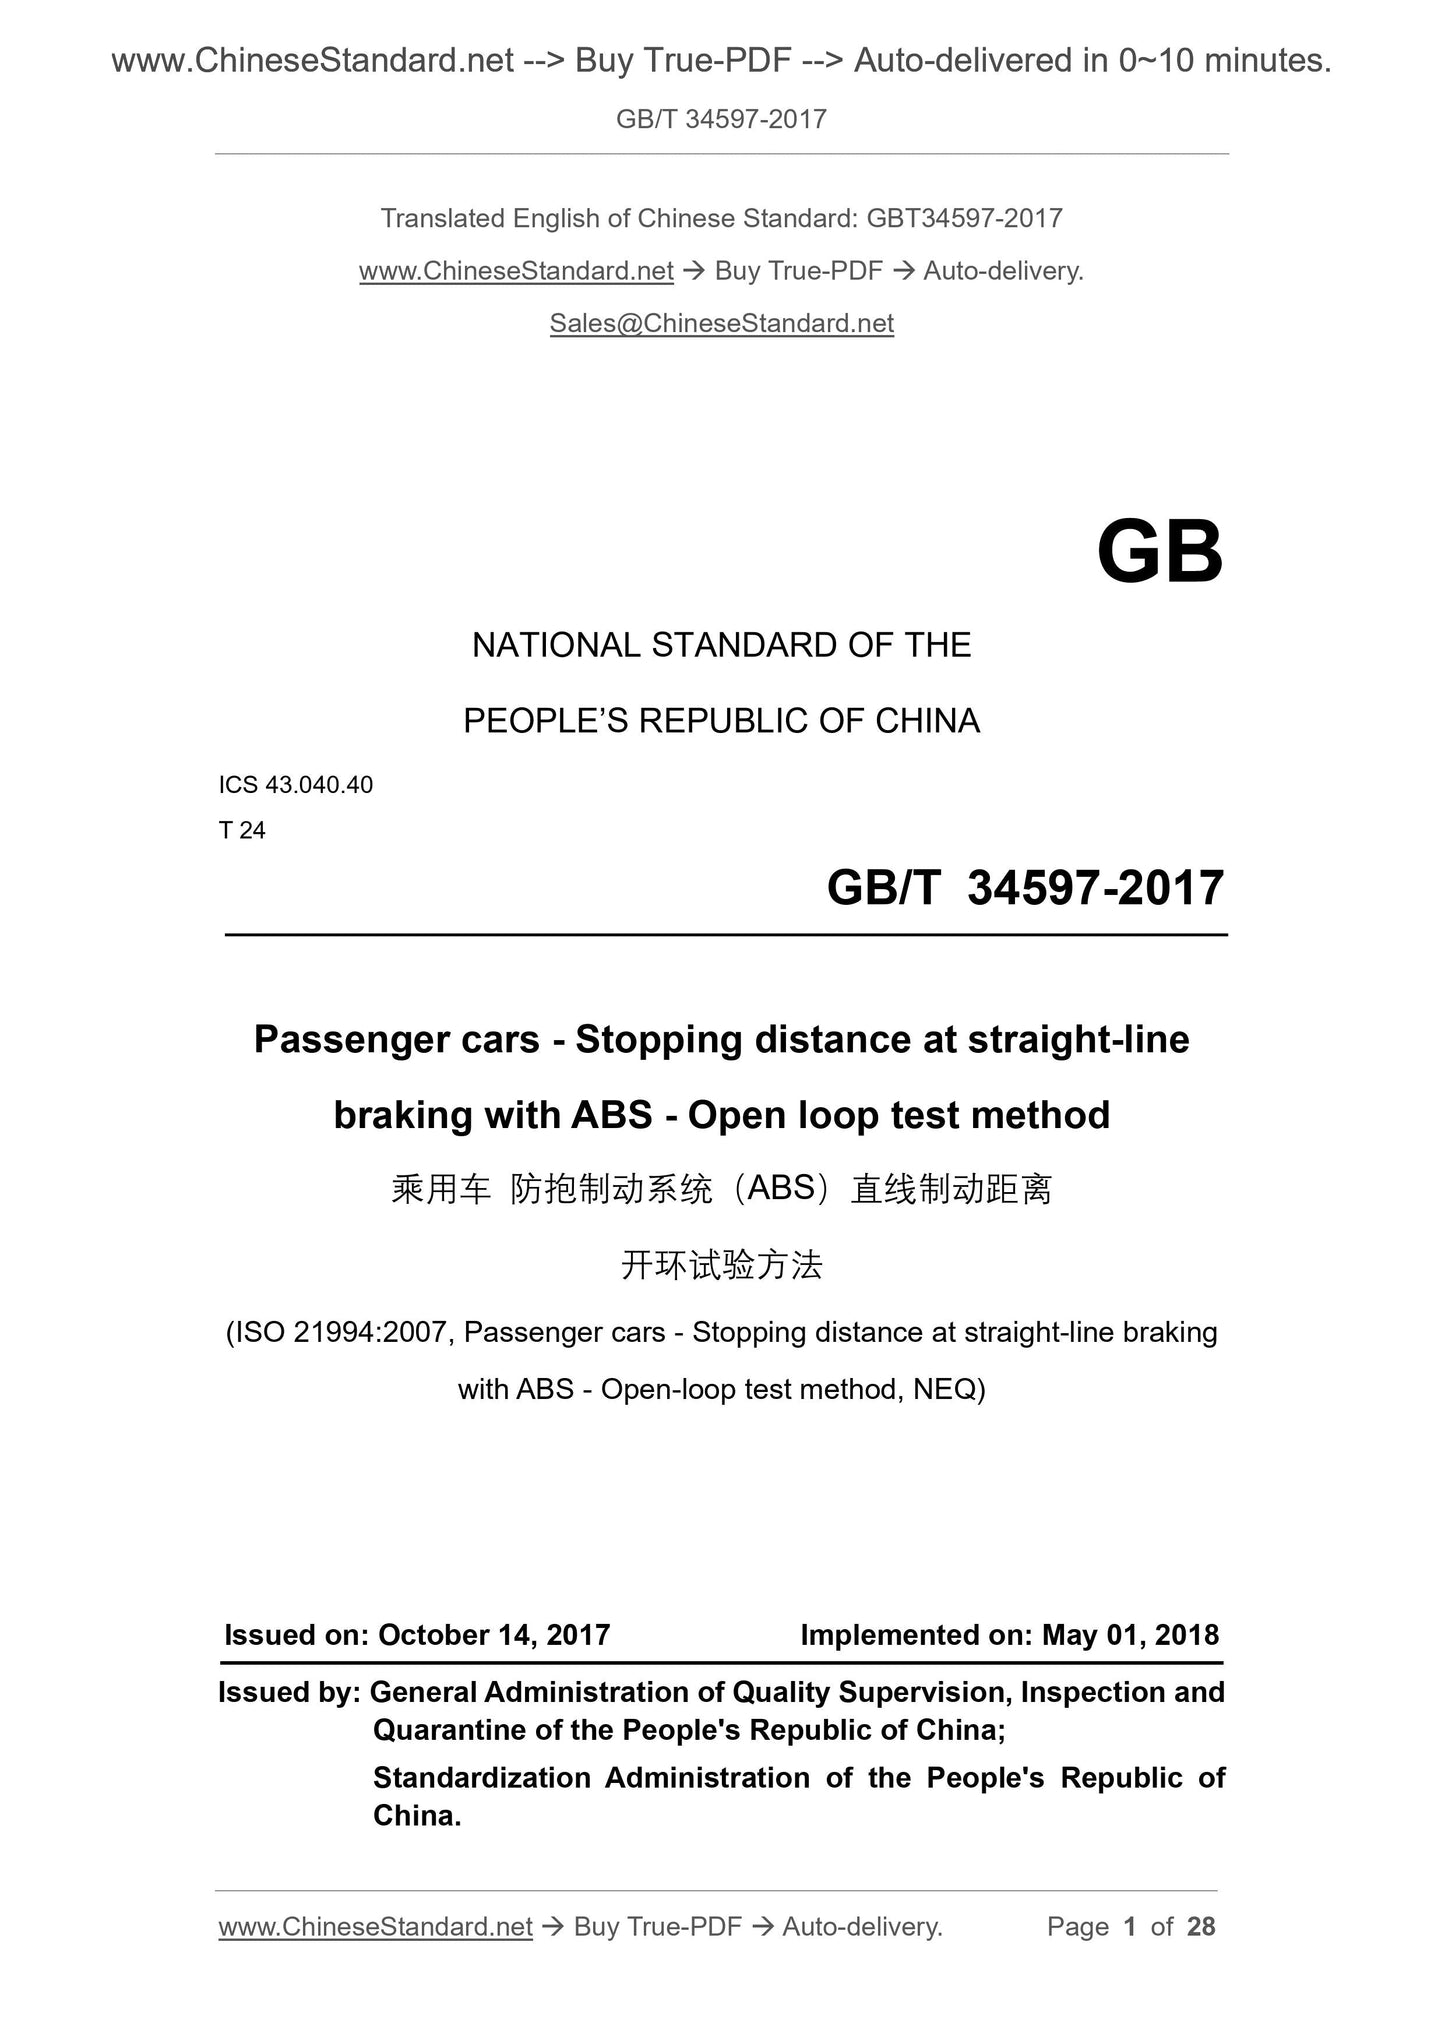 GB/T 34597-2017 Page 1